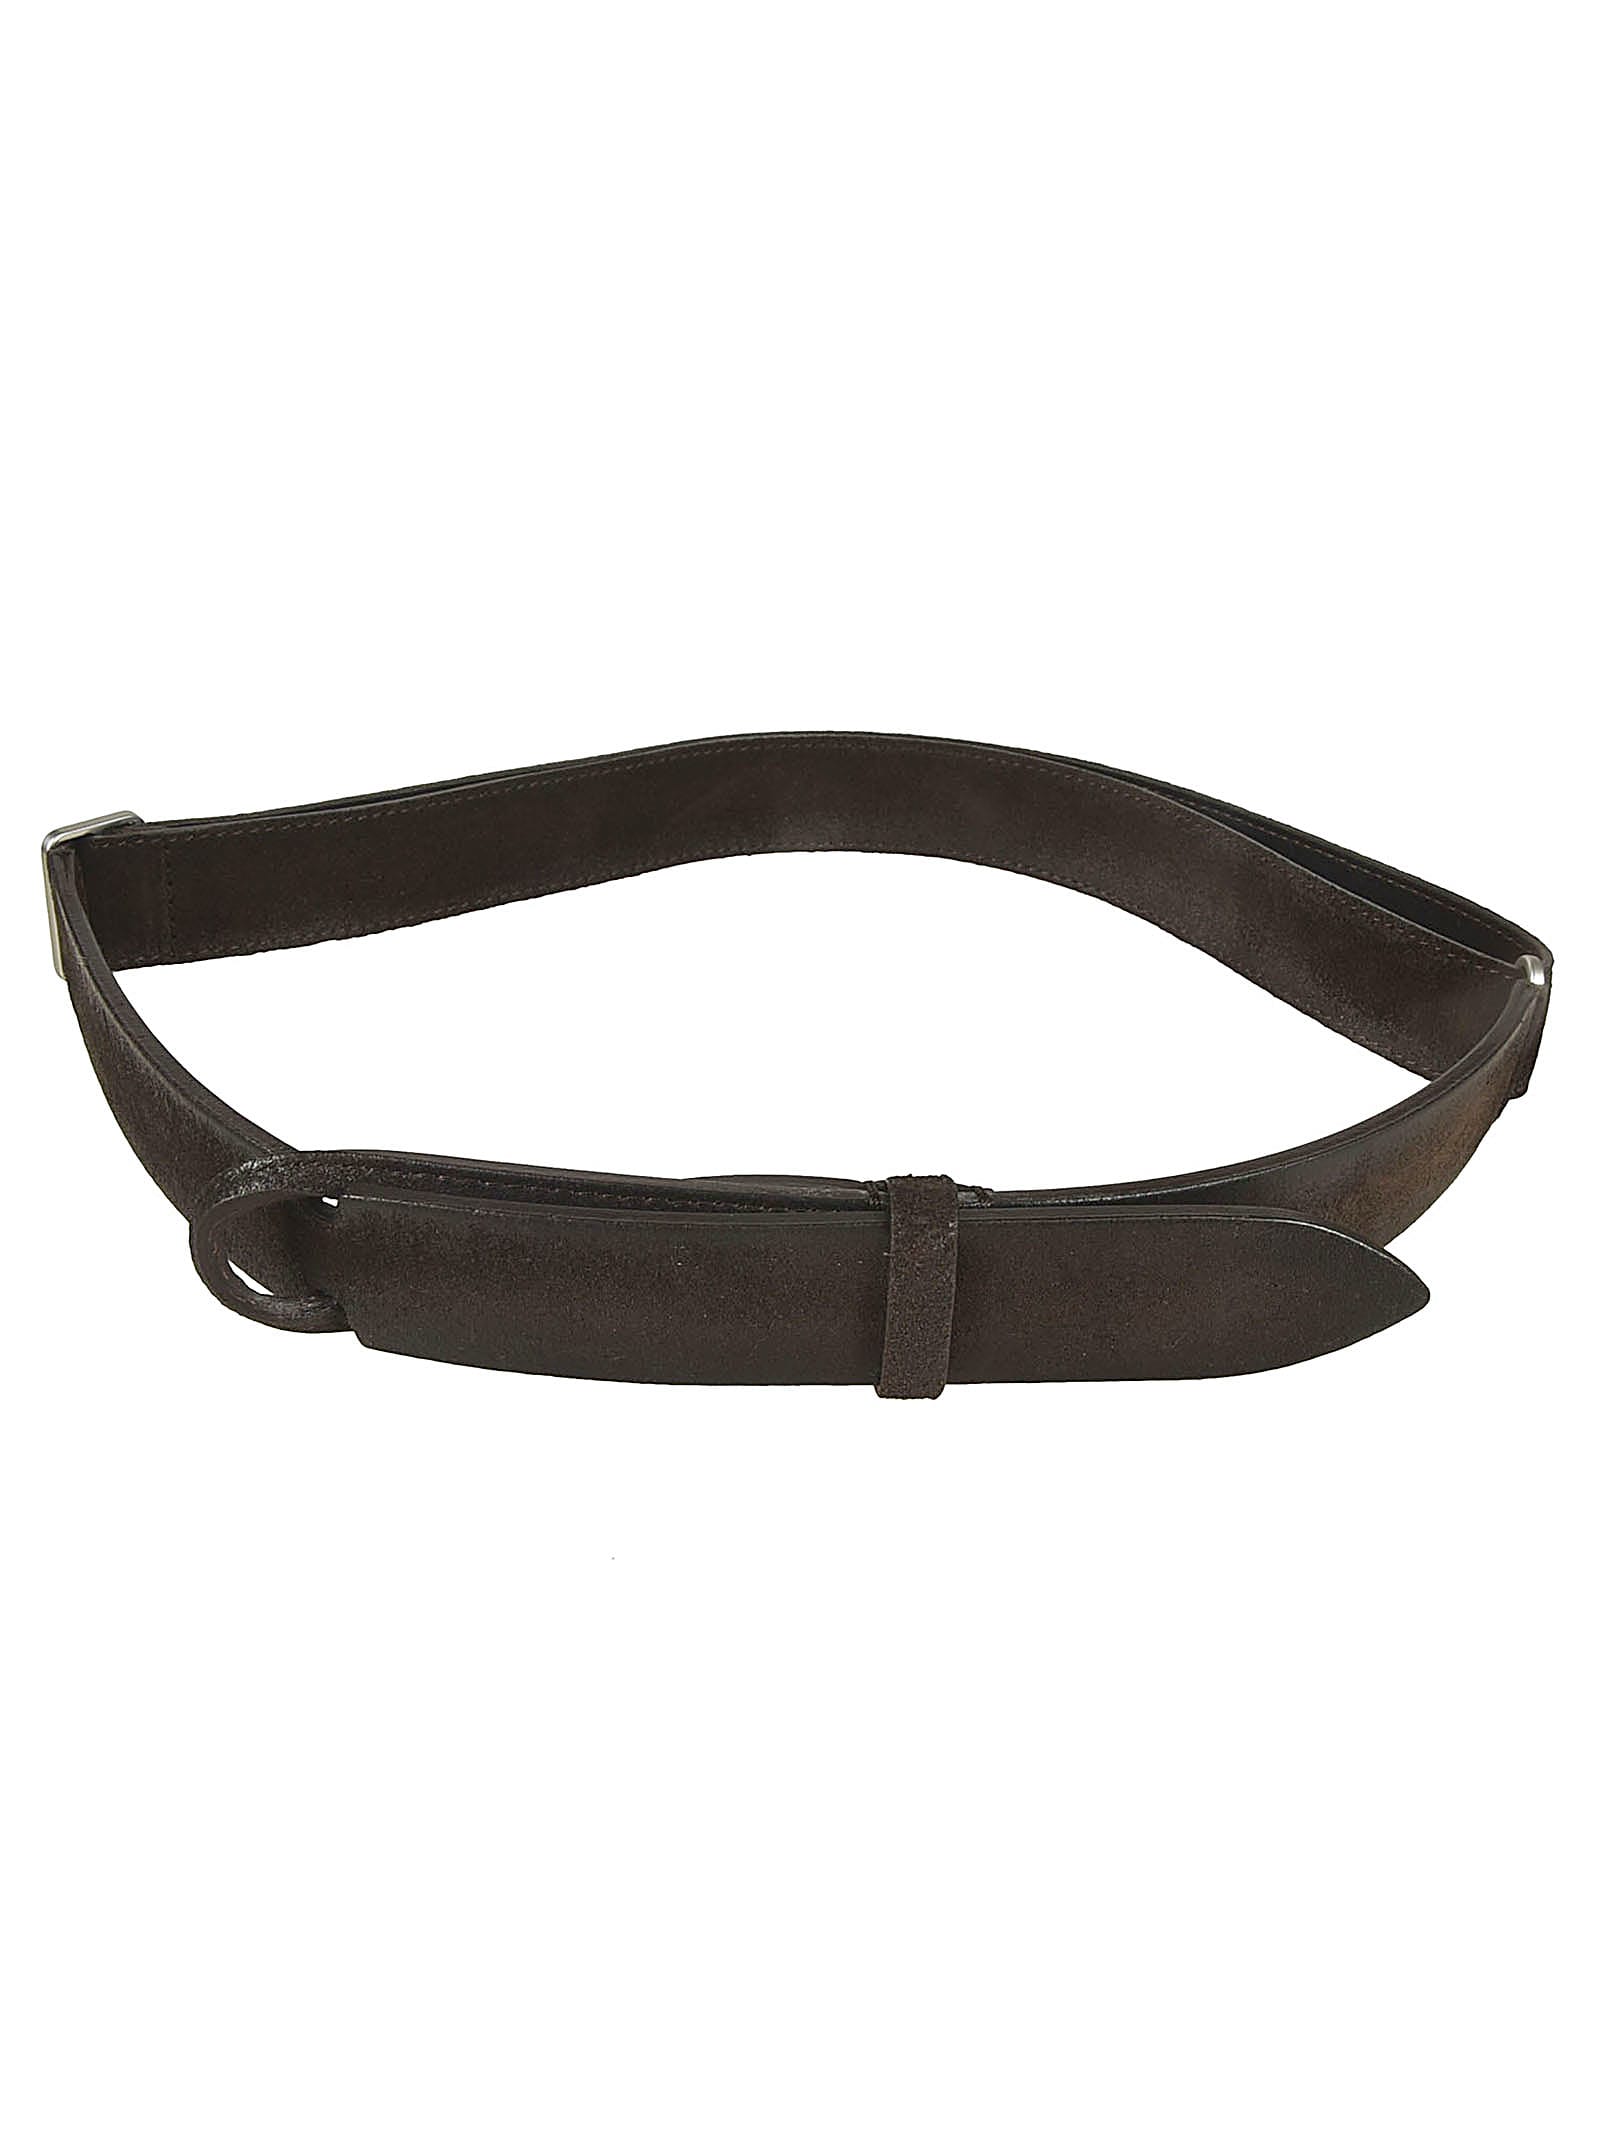 Shop Orciani No Buckle Belt In Brown